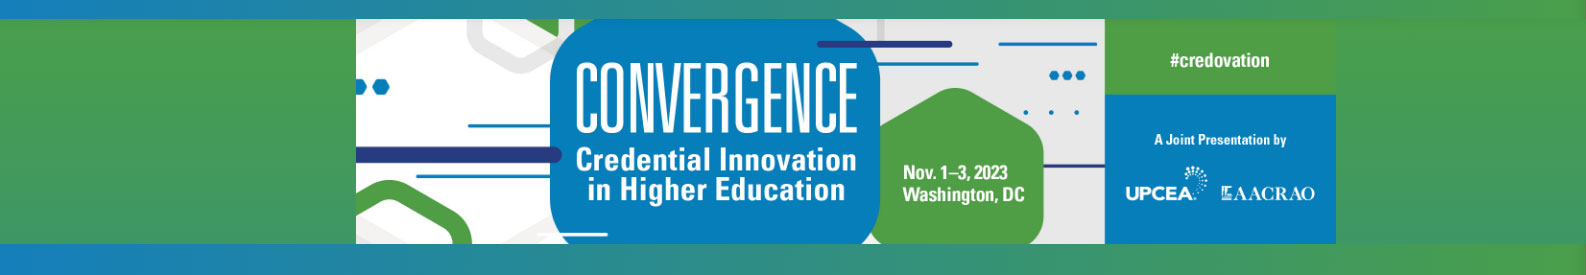 Credential Innovation in Higher Education: Workcred Joined as Partner, Presenter at Joint UPCEA and AACRAO Conference